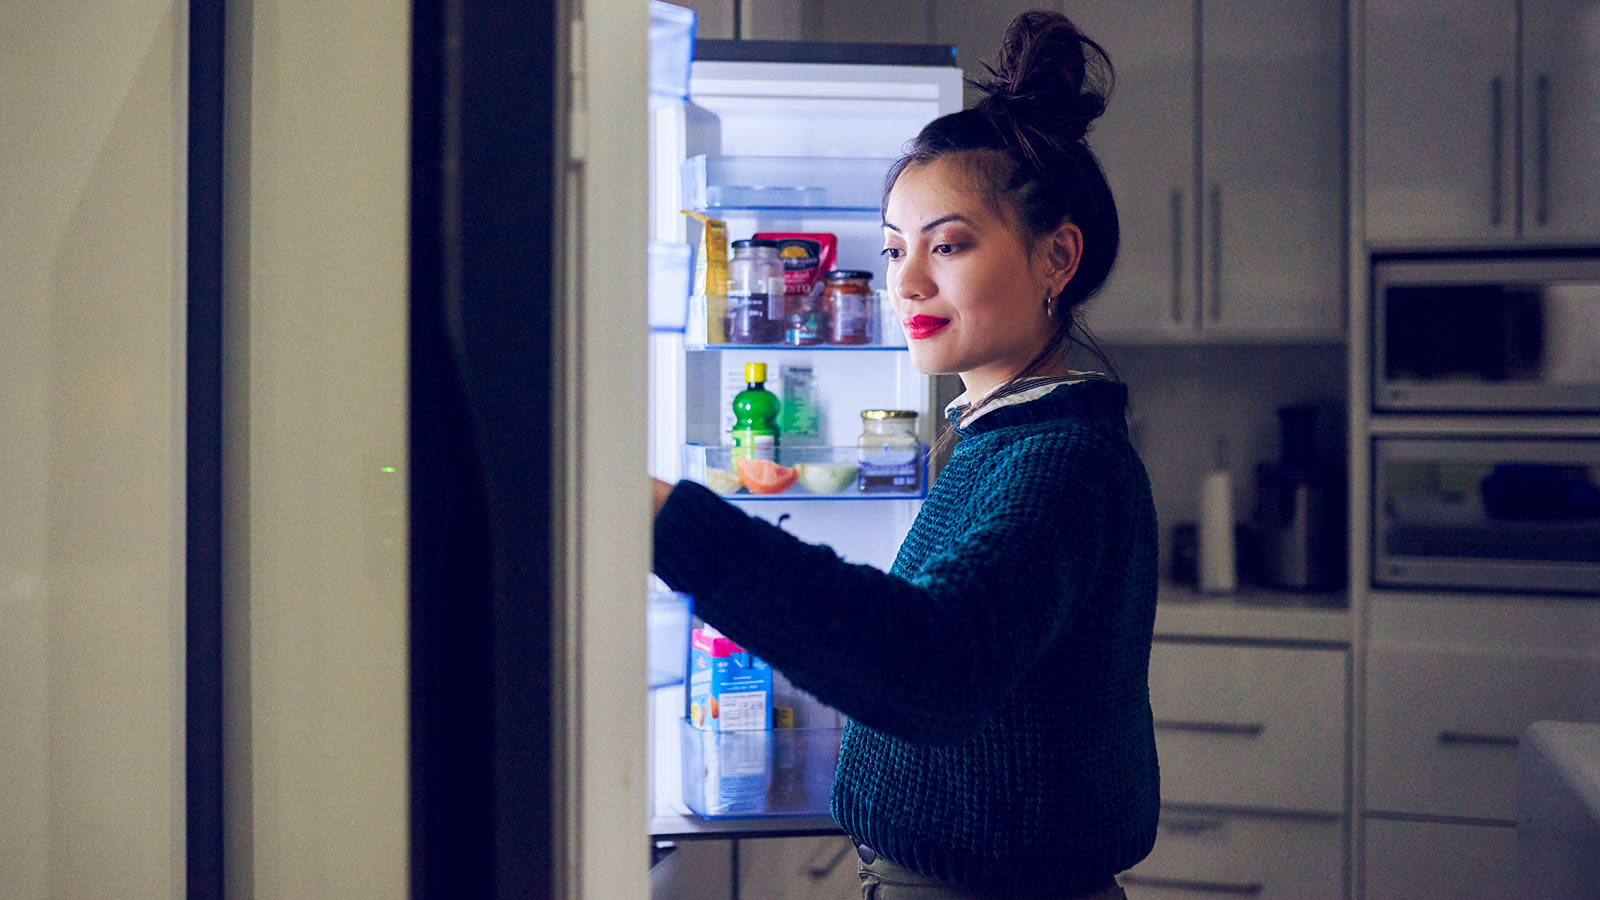 7 Easy Ways to Curb Your Nighttime Snack Cravings